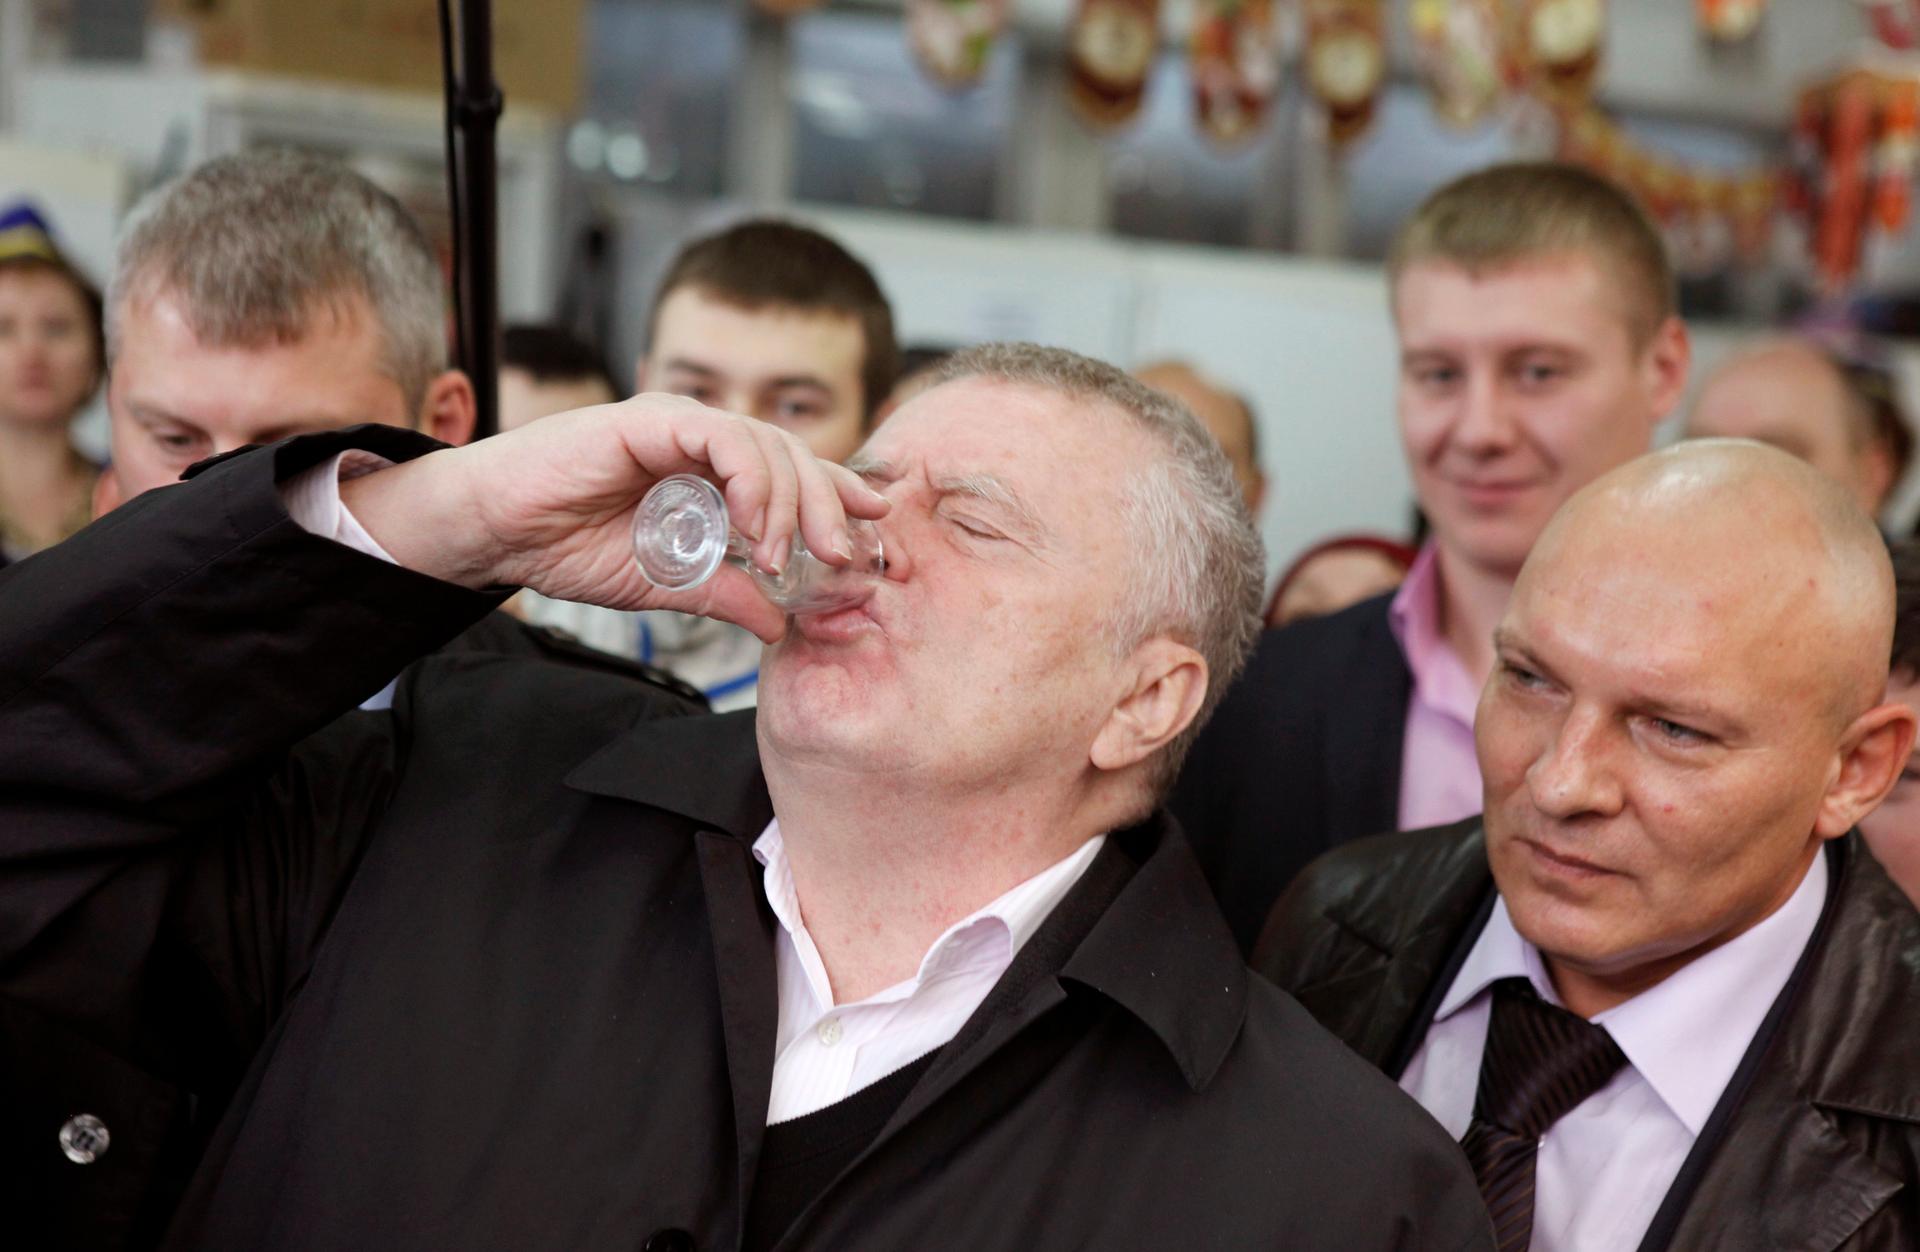 Vladimir Zhirinovsky, leader of the Liberal Democratic Party of Russia, drinks a shot of vodka while visiting a market as part of his party Duma election campaign in the southern Russian city of Stavropol.